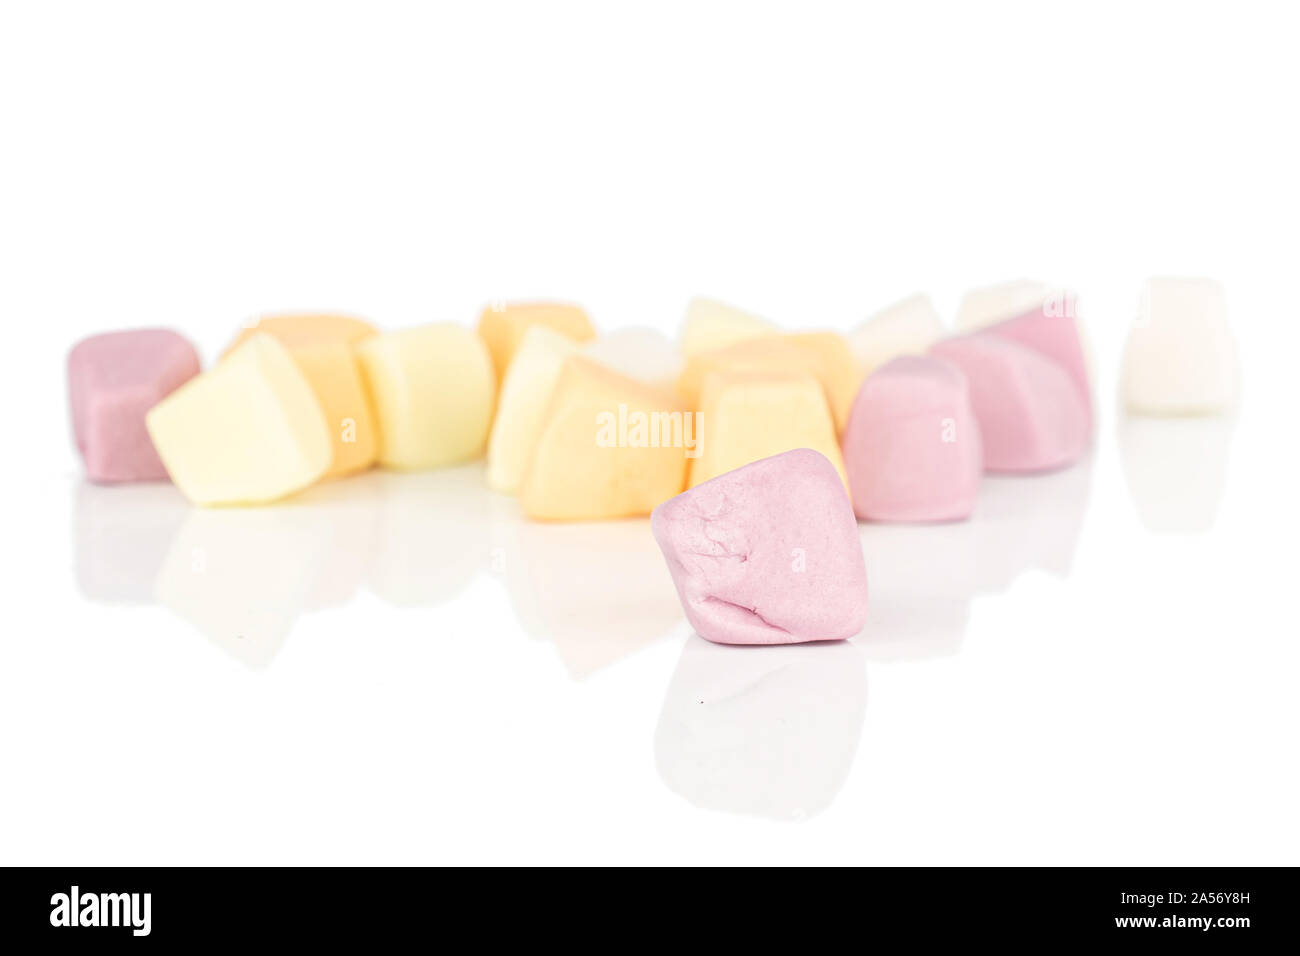 Lot of whole bright soft pastel candy isolated on white background Stock Photo